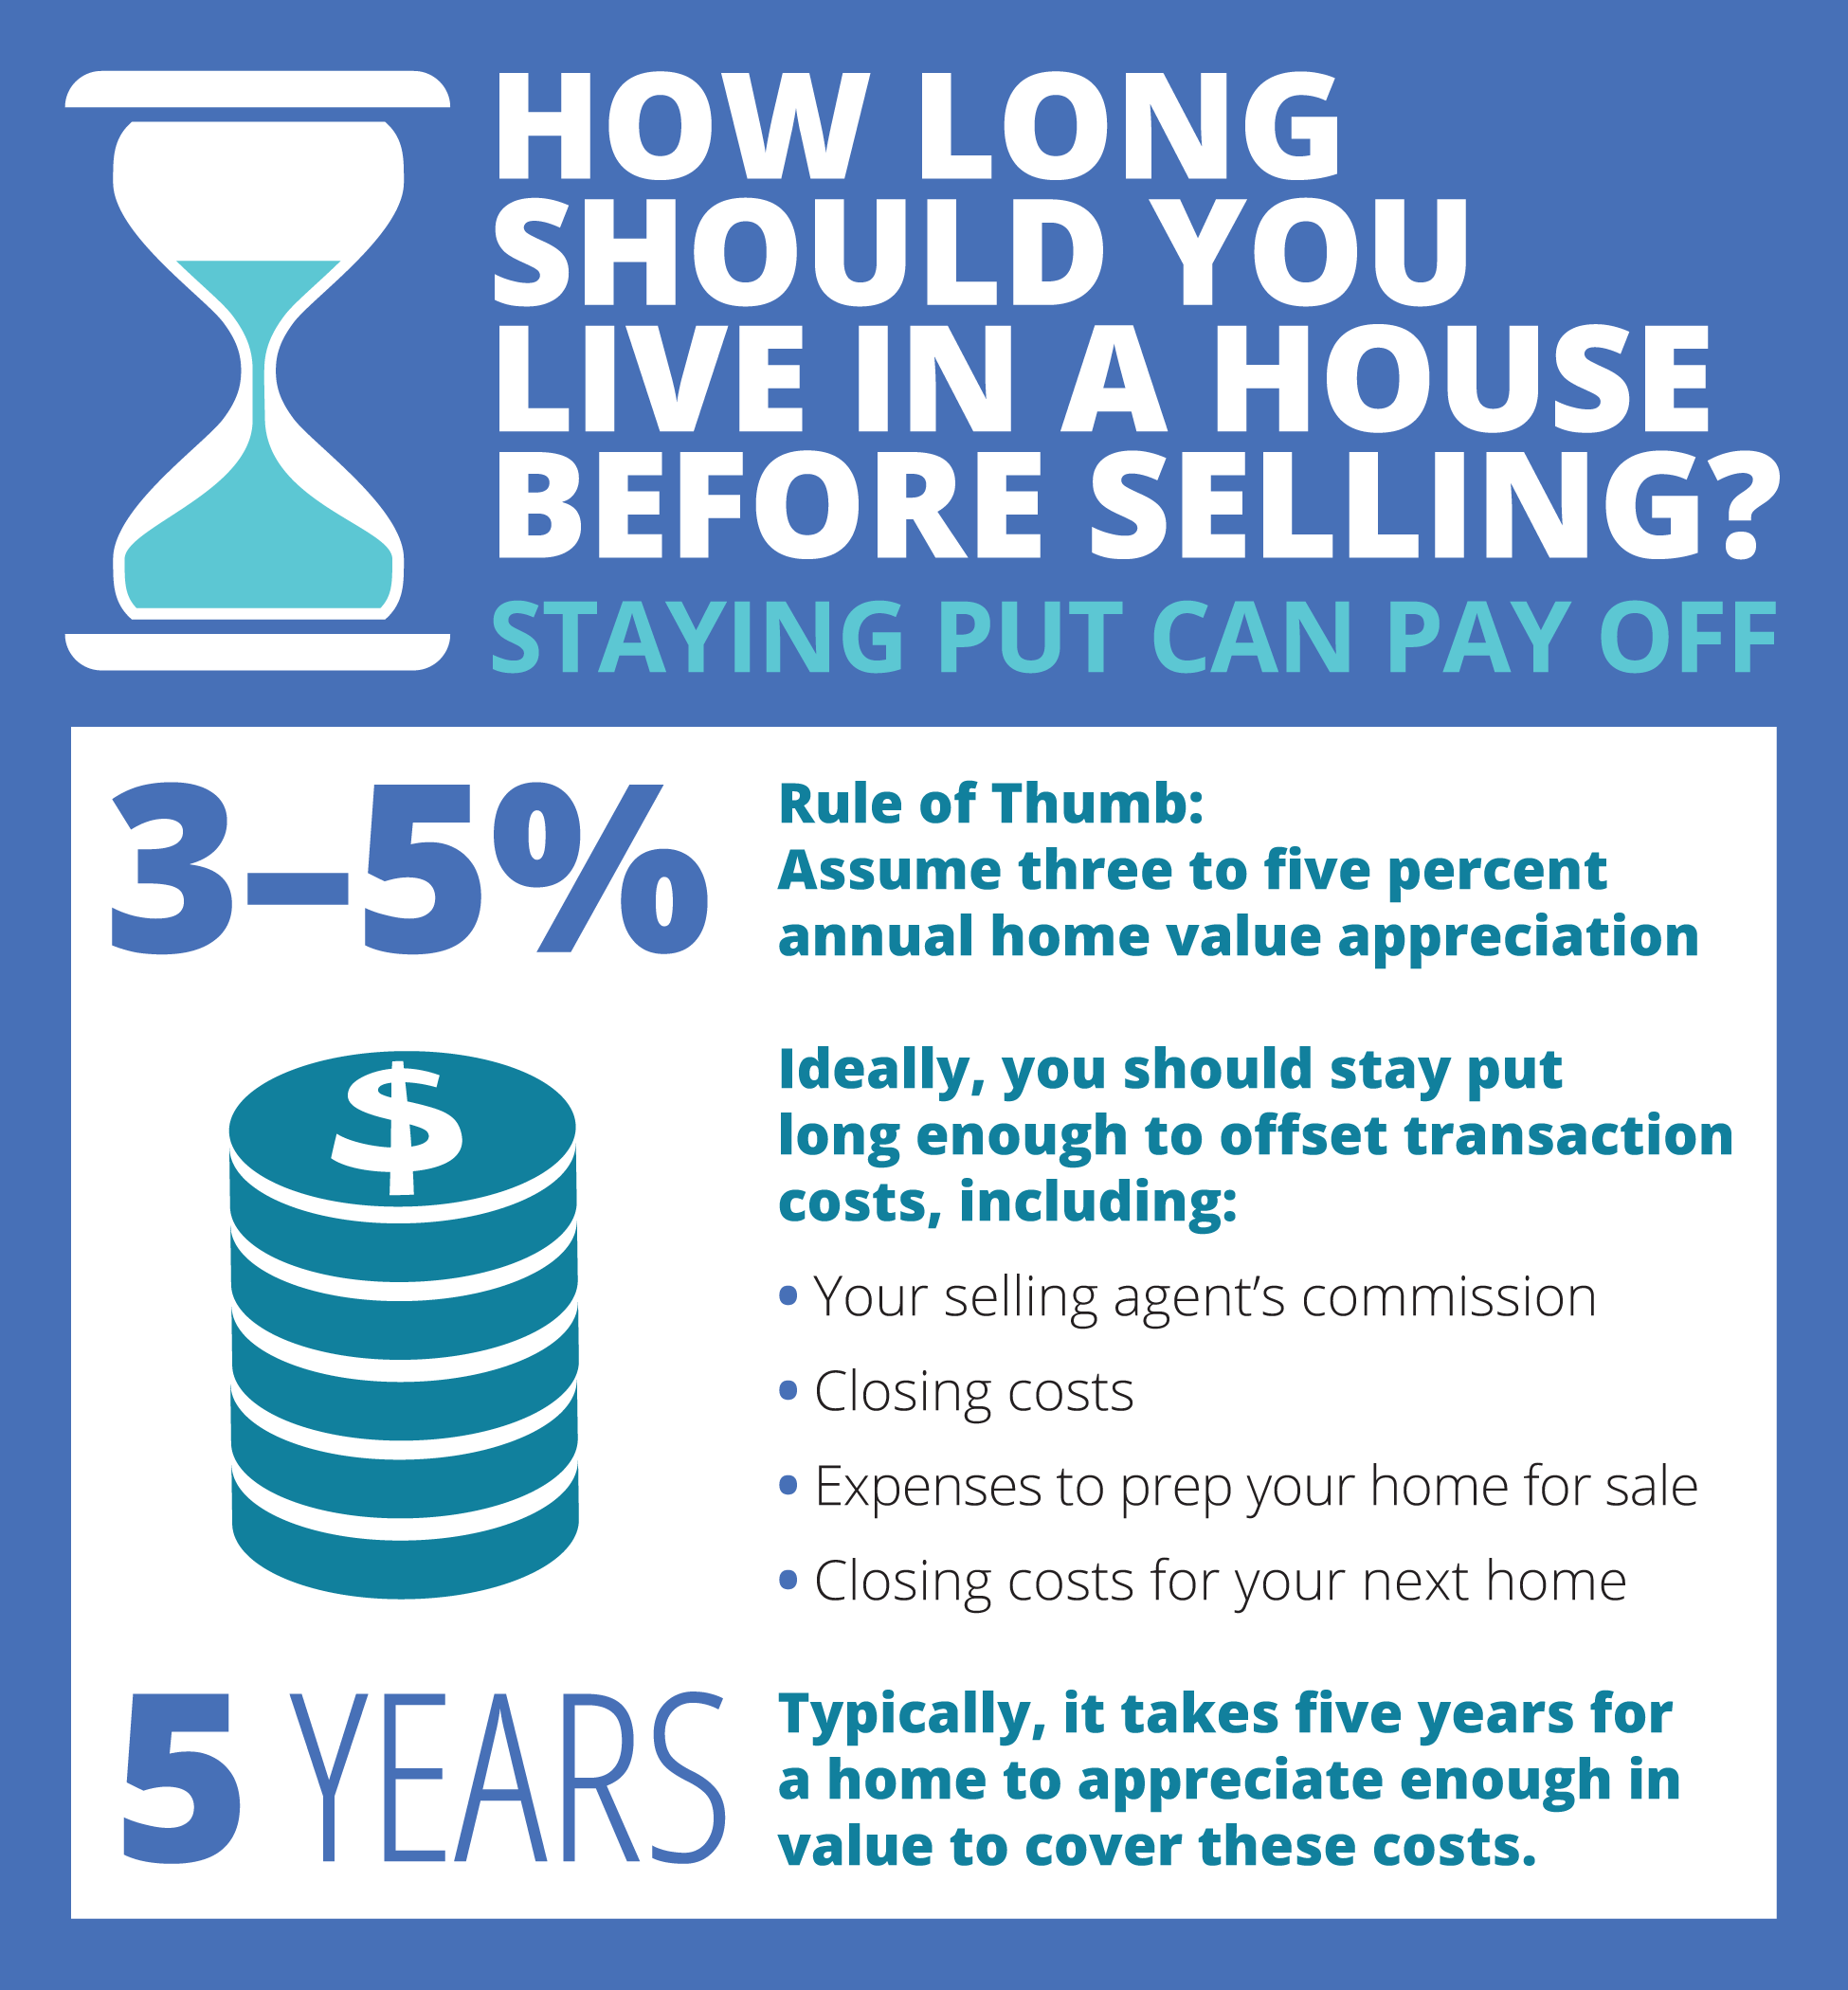 How long should you live in a house before selling?